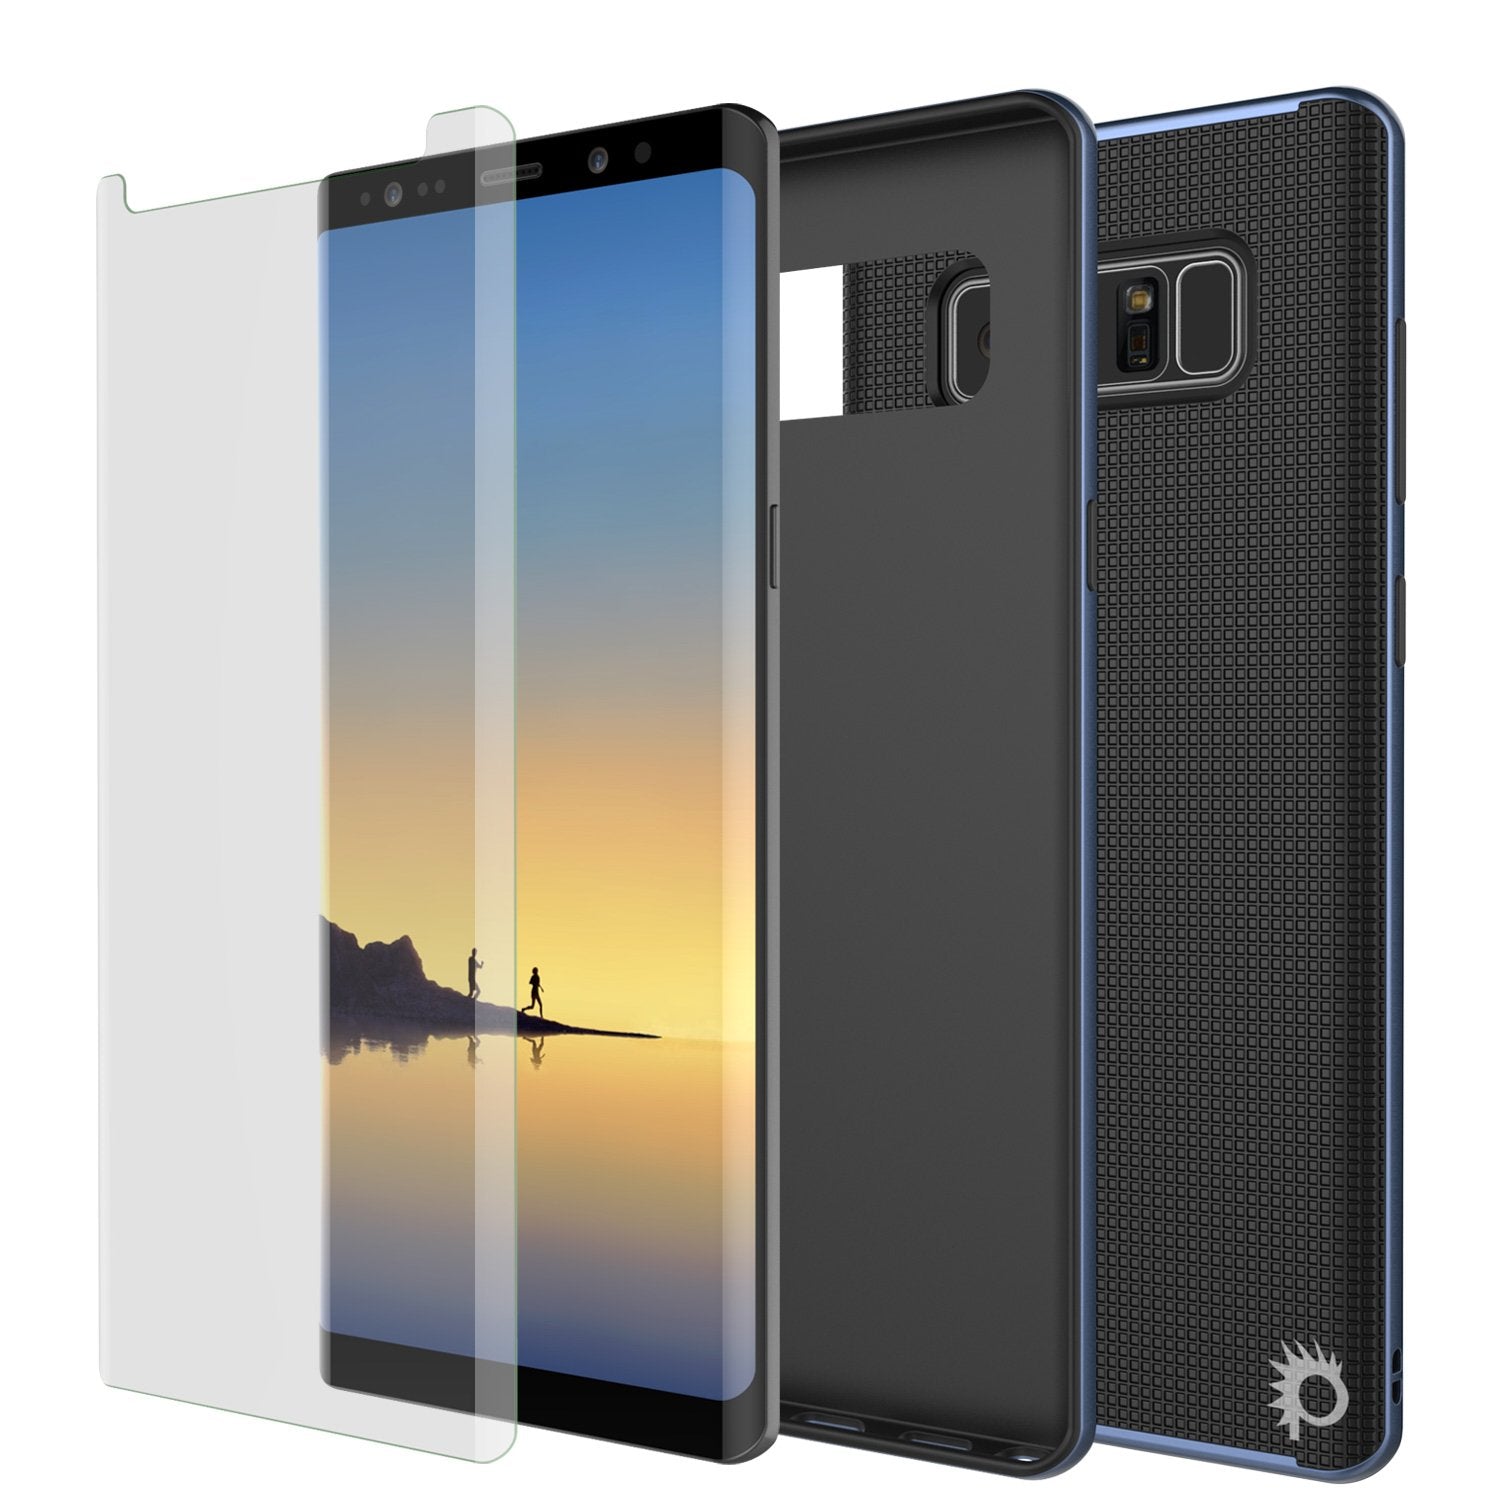 Galaxy Note 8 Case, PunkCase Stealth Navy Blue Series Hybrid 3-Piece Shockproof Dual Layer Cover